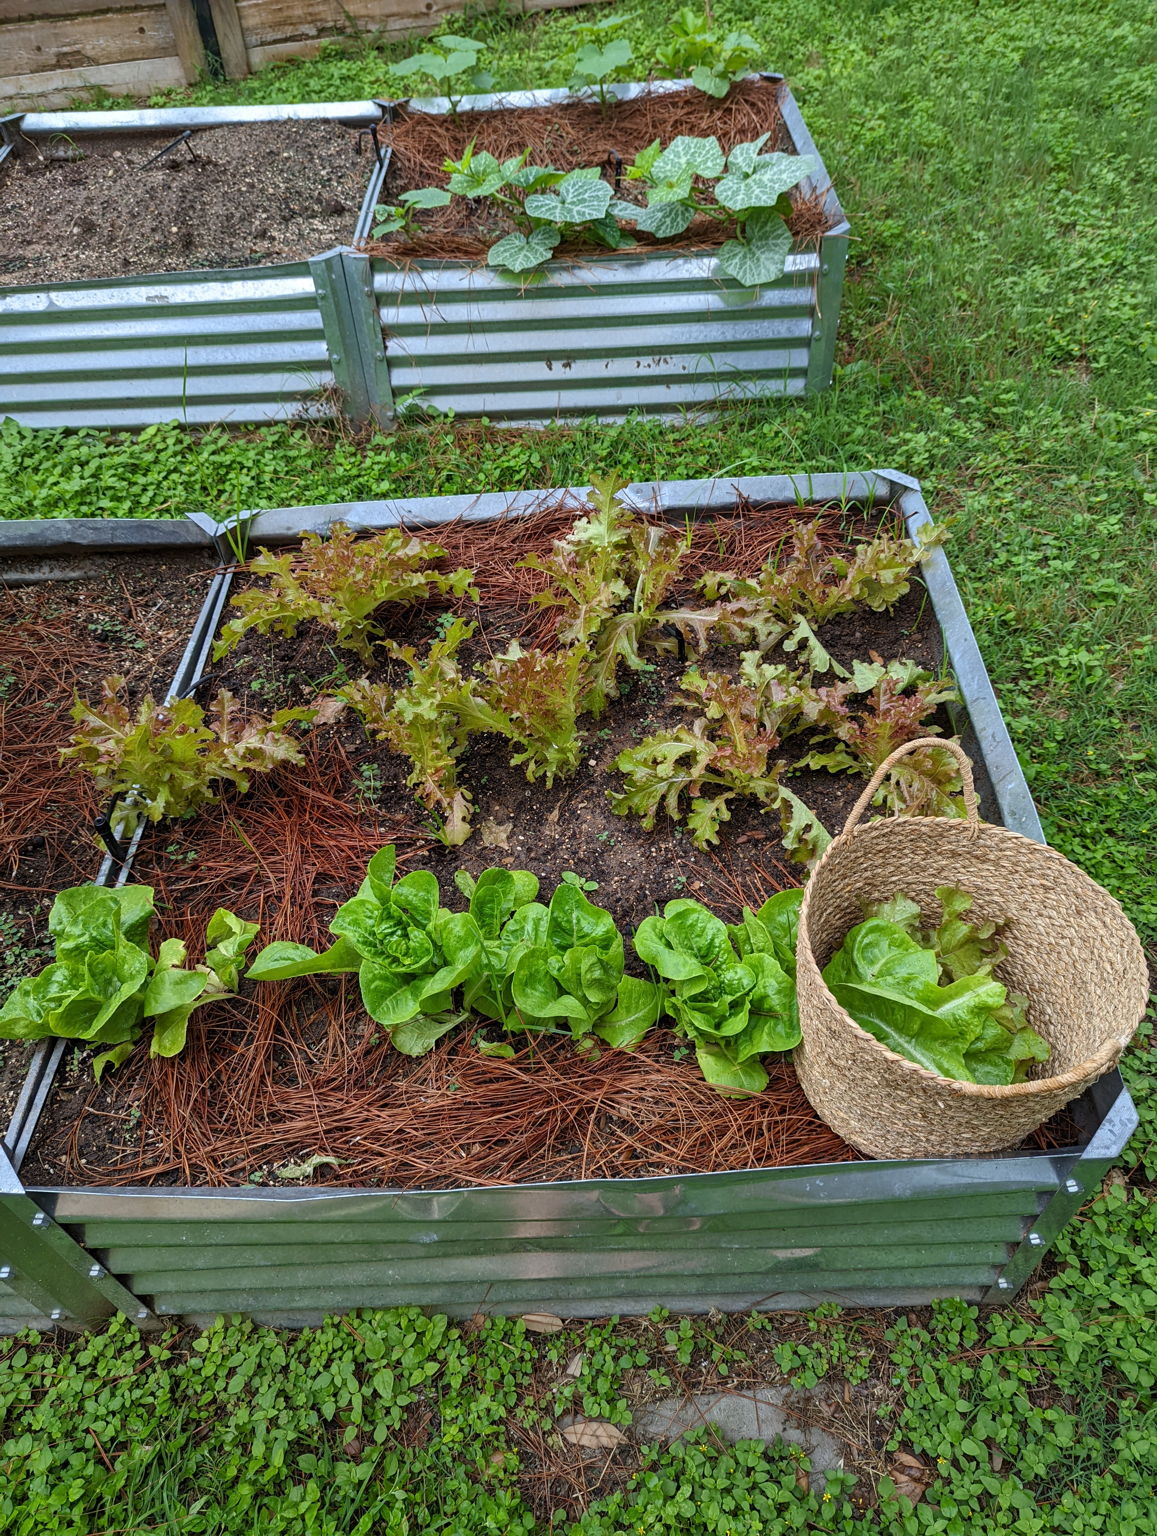 Imagine what you could grow in your own raised bed vegetable garden